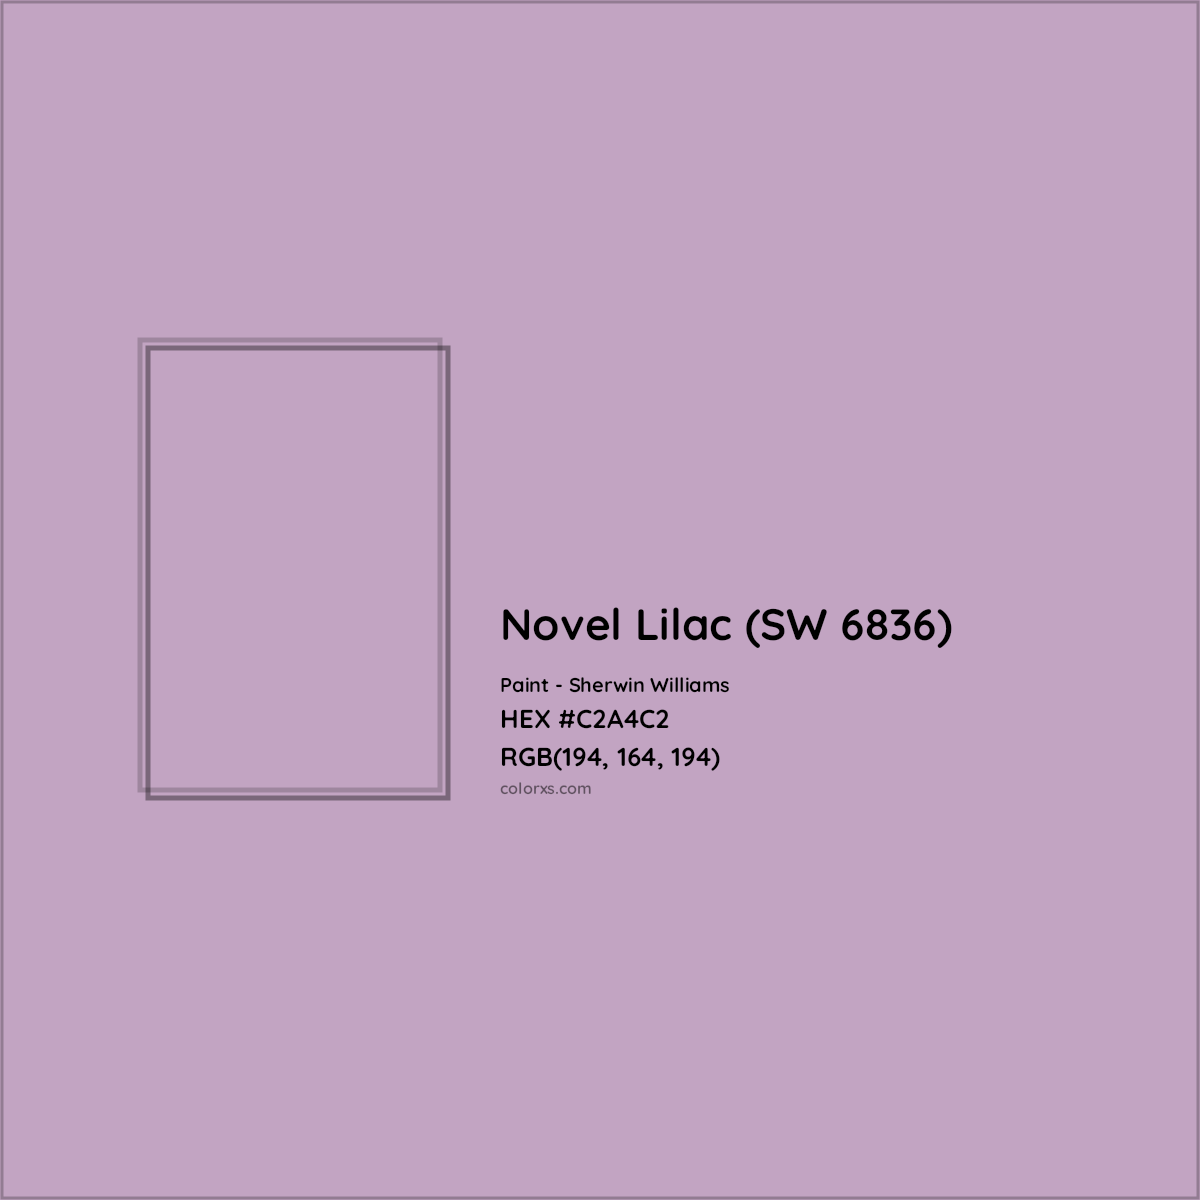 HEX #C2A4C2 Novel Lilac (SW 6836) Paint Sherwin Williams - Color Code